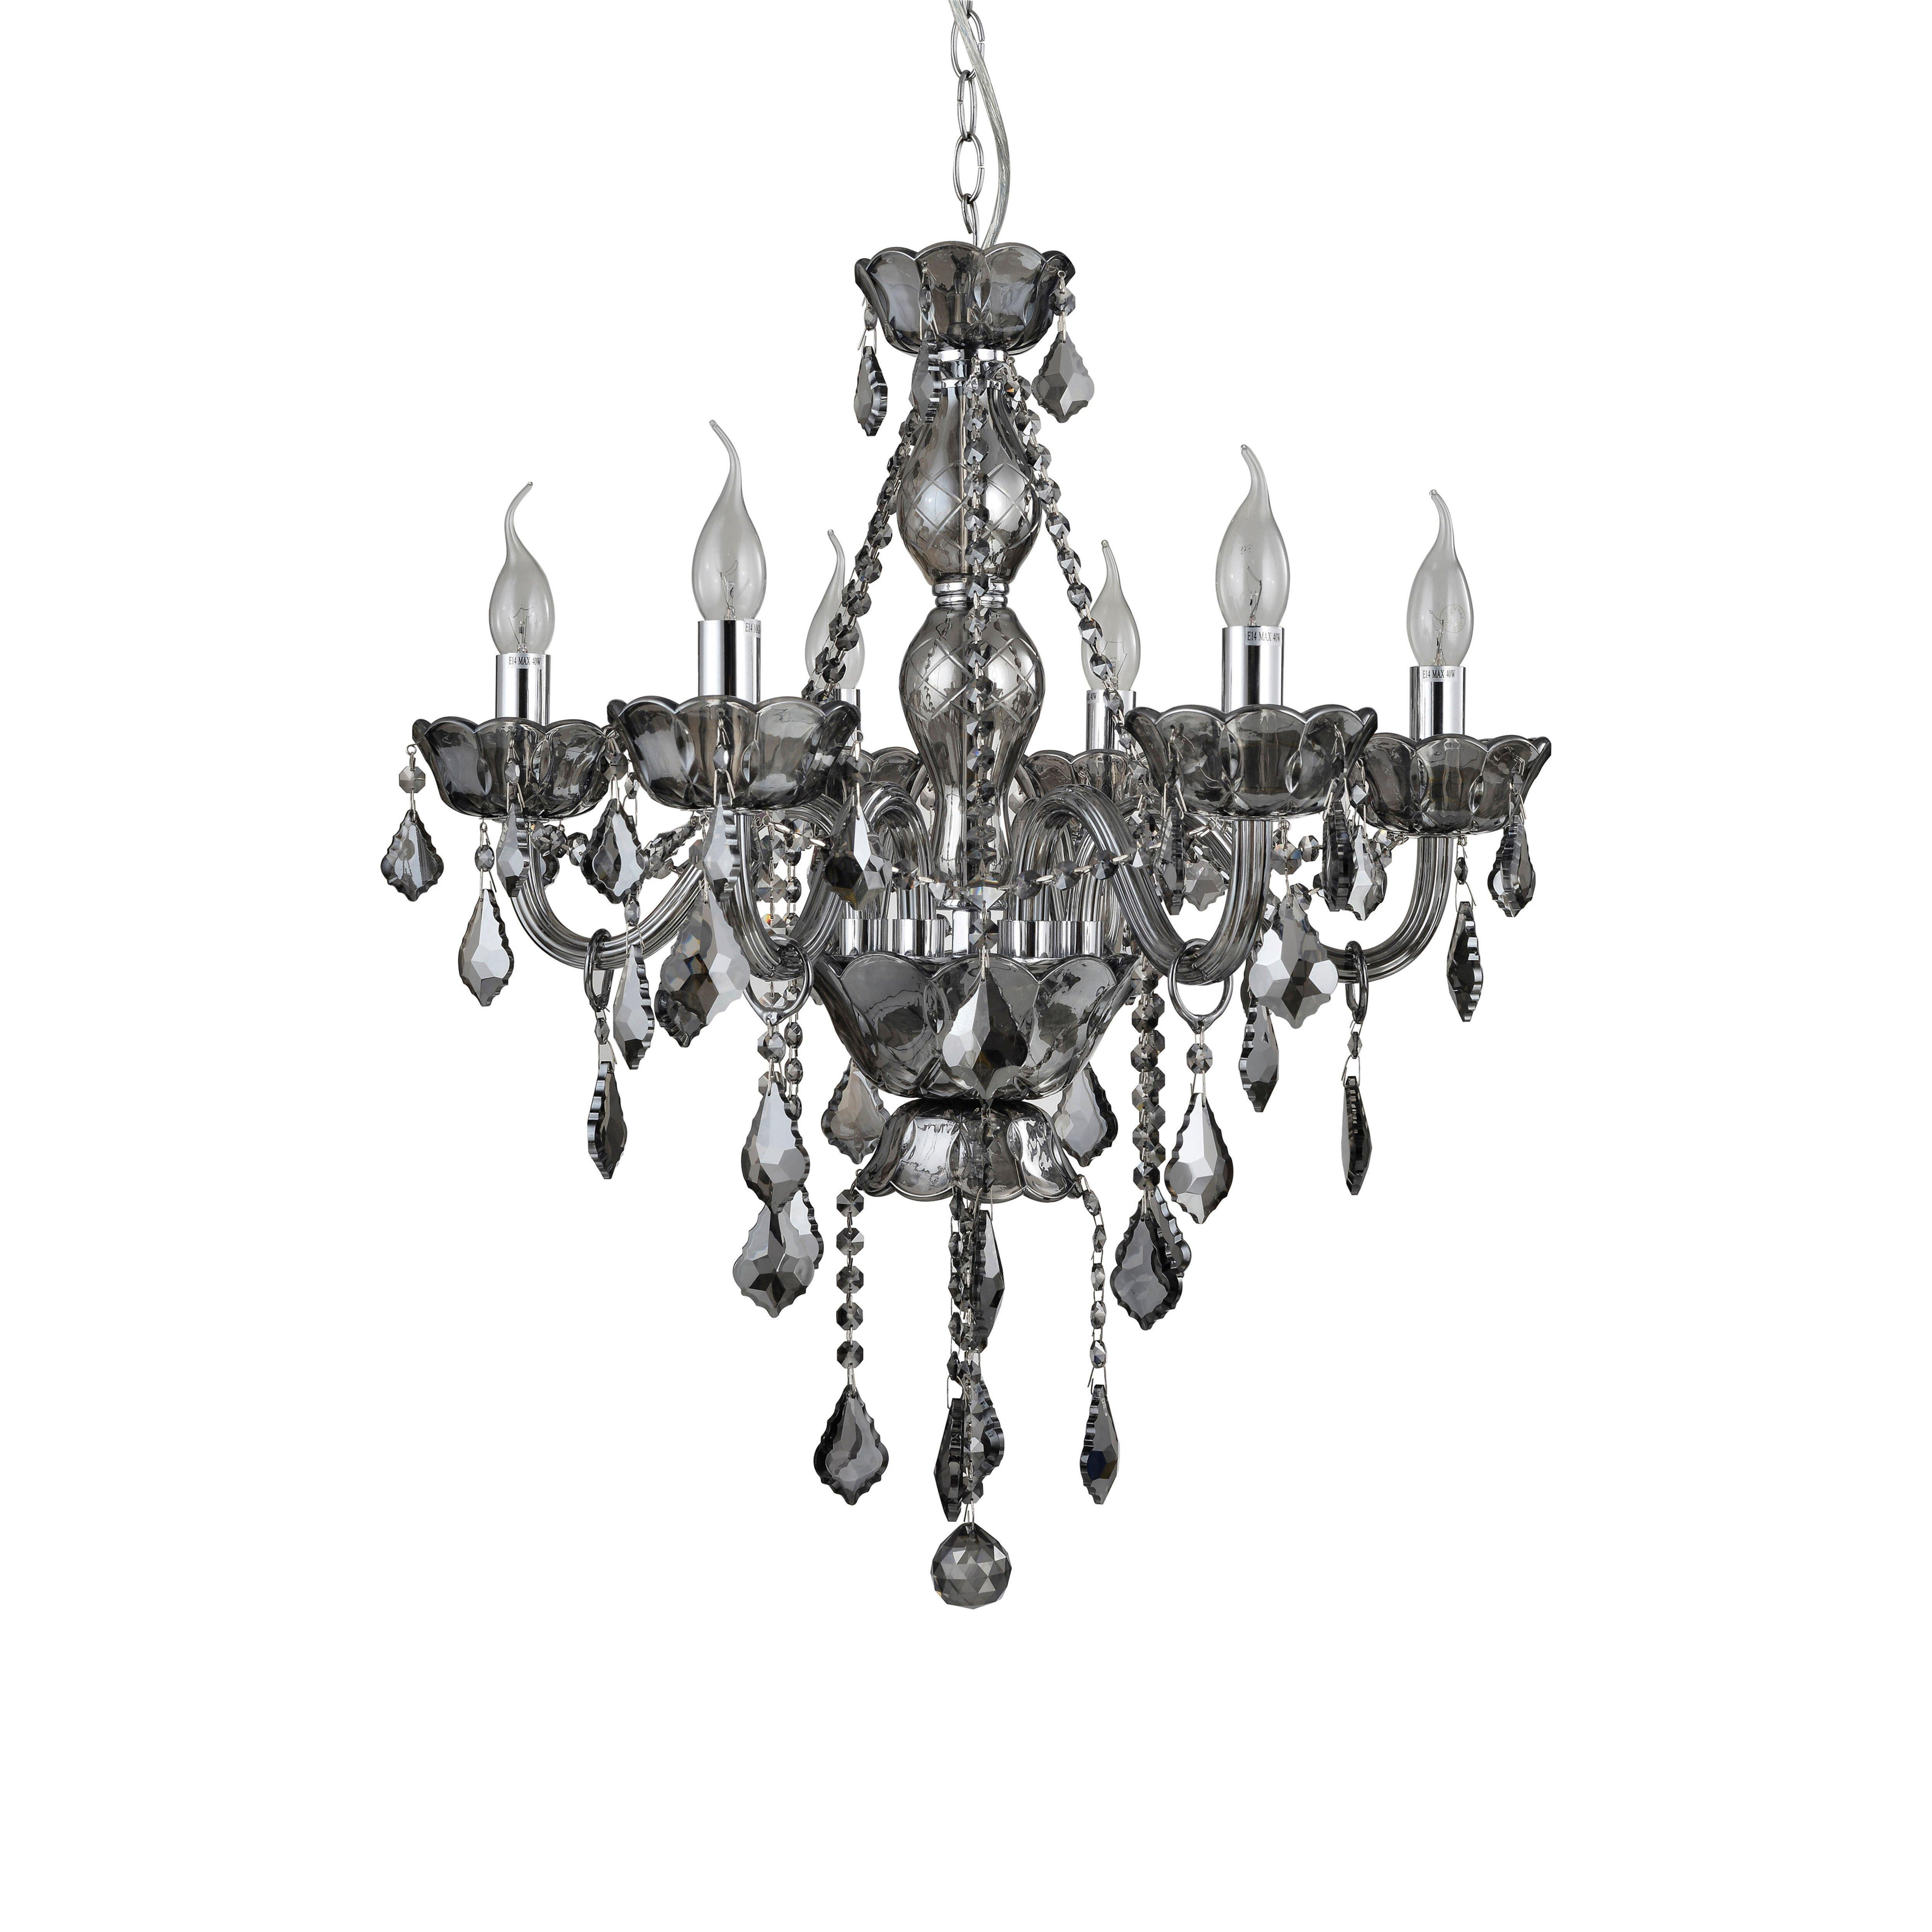 Interiors by Premier Murano 8 Bulb Glass Chandelier - image 1